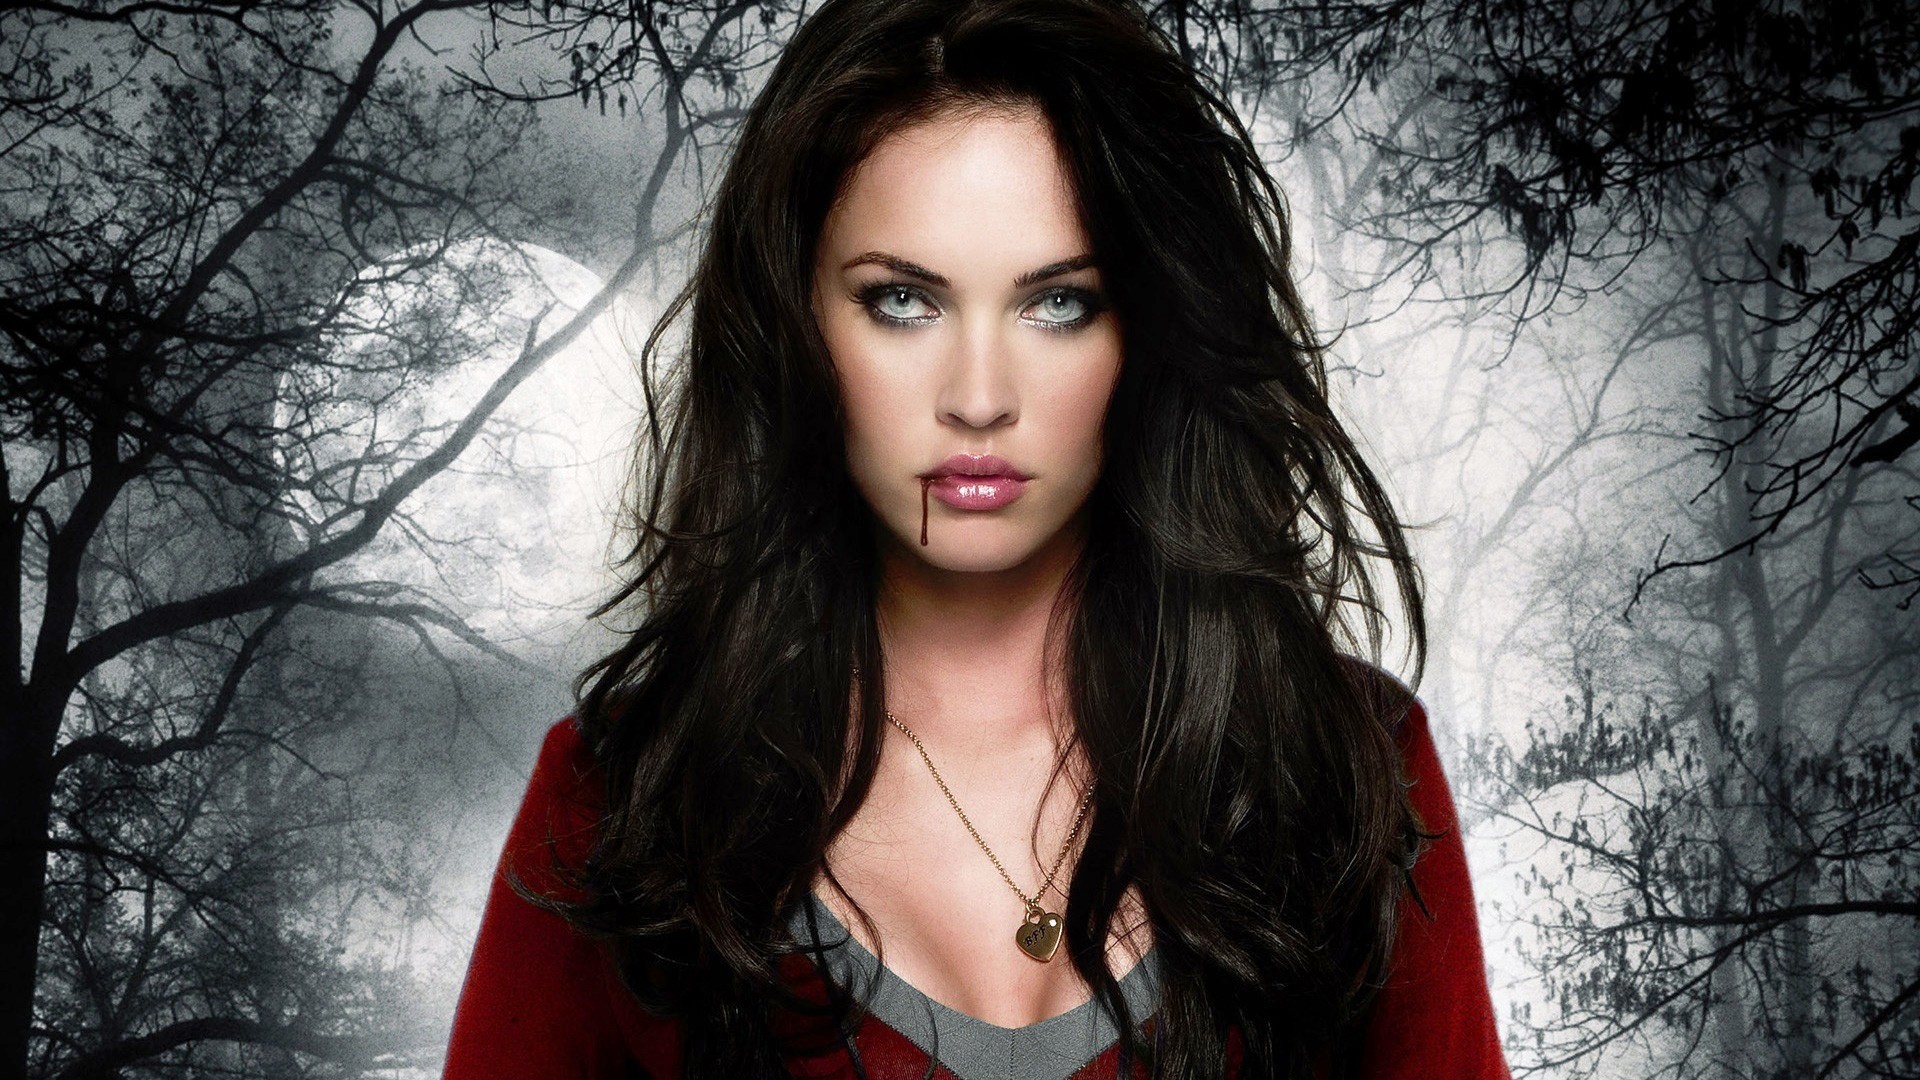 1920x1080 Megan Fox Widescreeen Gothic High Resolution Desktop Background Vampire  Looks Cute Wallpapers Images And Pictures